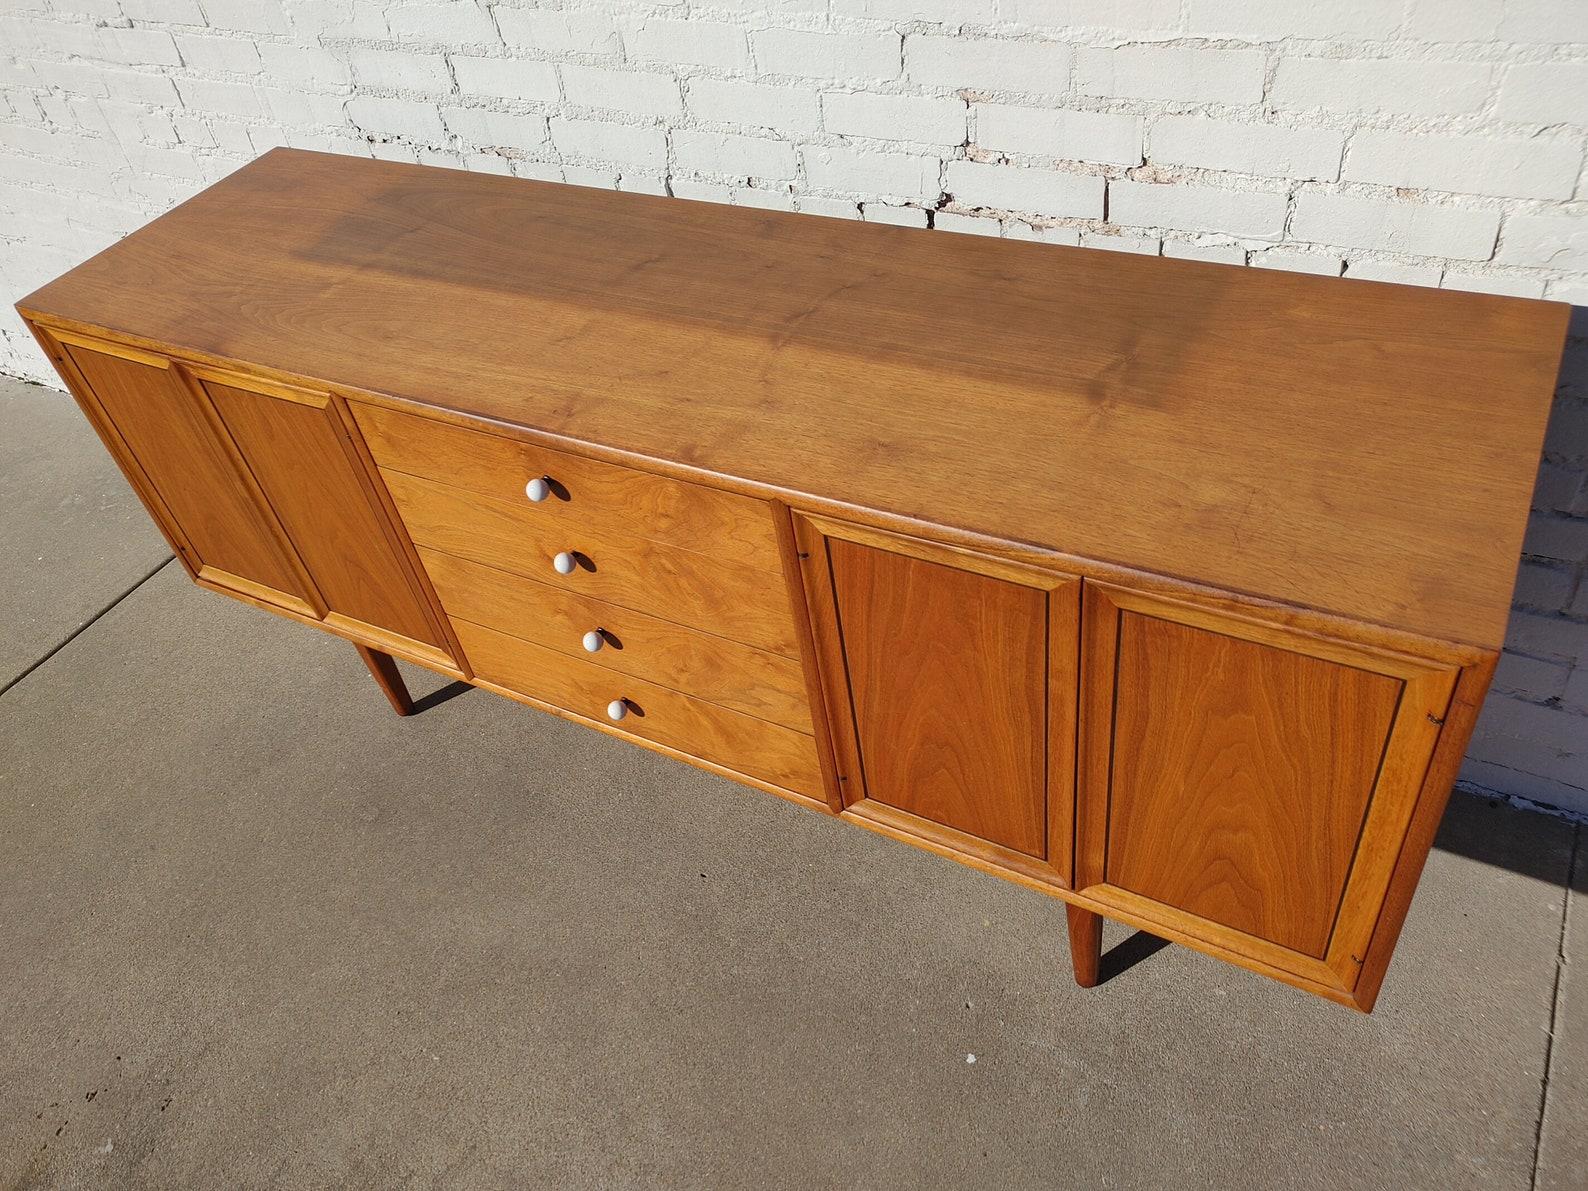 Mid Century Modern Drexel Declaration Sideboard/Hutch

Above average vintage condition and structurally sound. Has some expected slight finish wear and scratching. Please message with any questions.  
Scott

Additional information:
Materials: